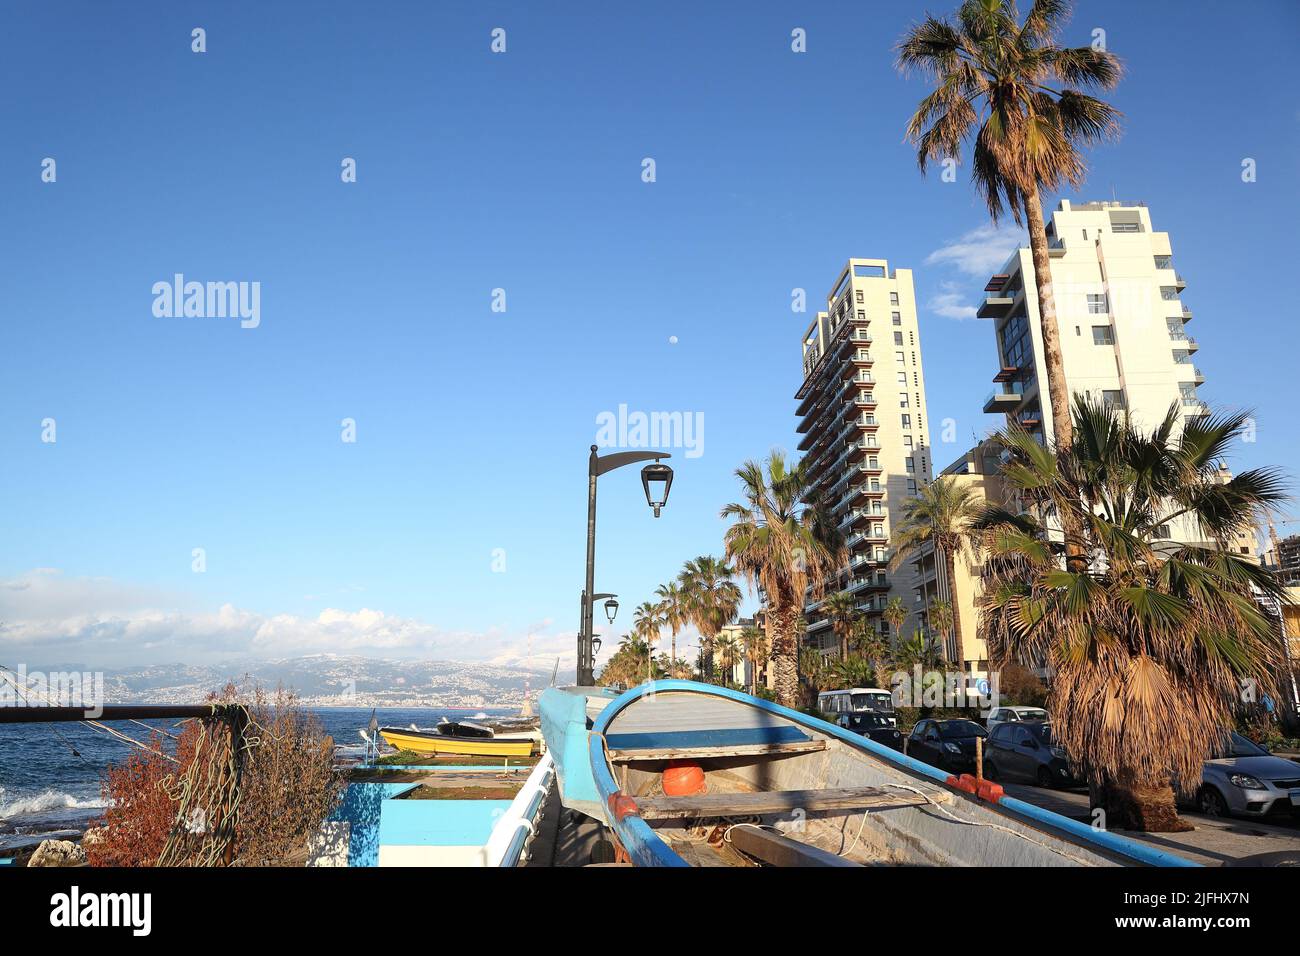 Beirut Corniche on a clear sunny day. During winter storms, fisherman bring up their boats from the small harbor to protect them from the elements. Stock Photo